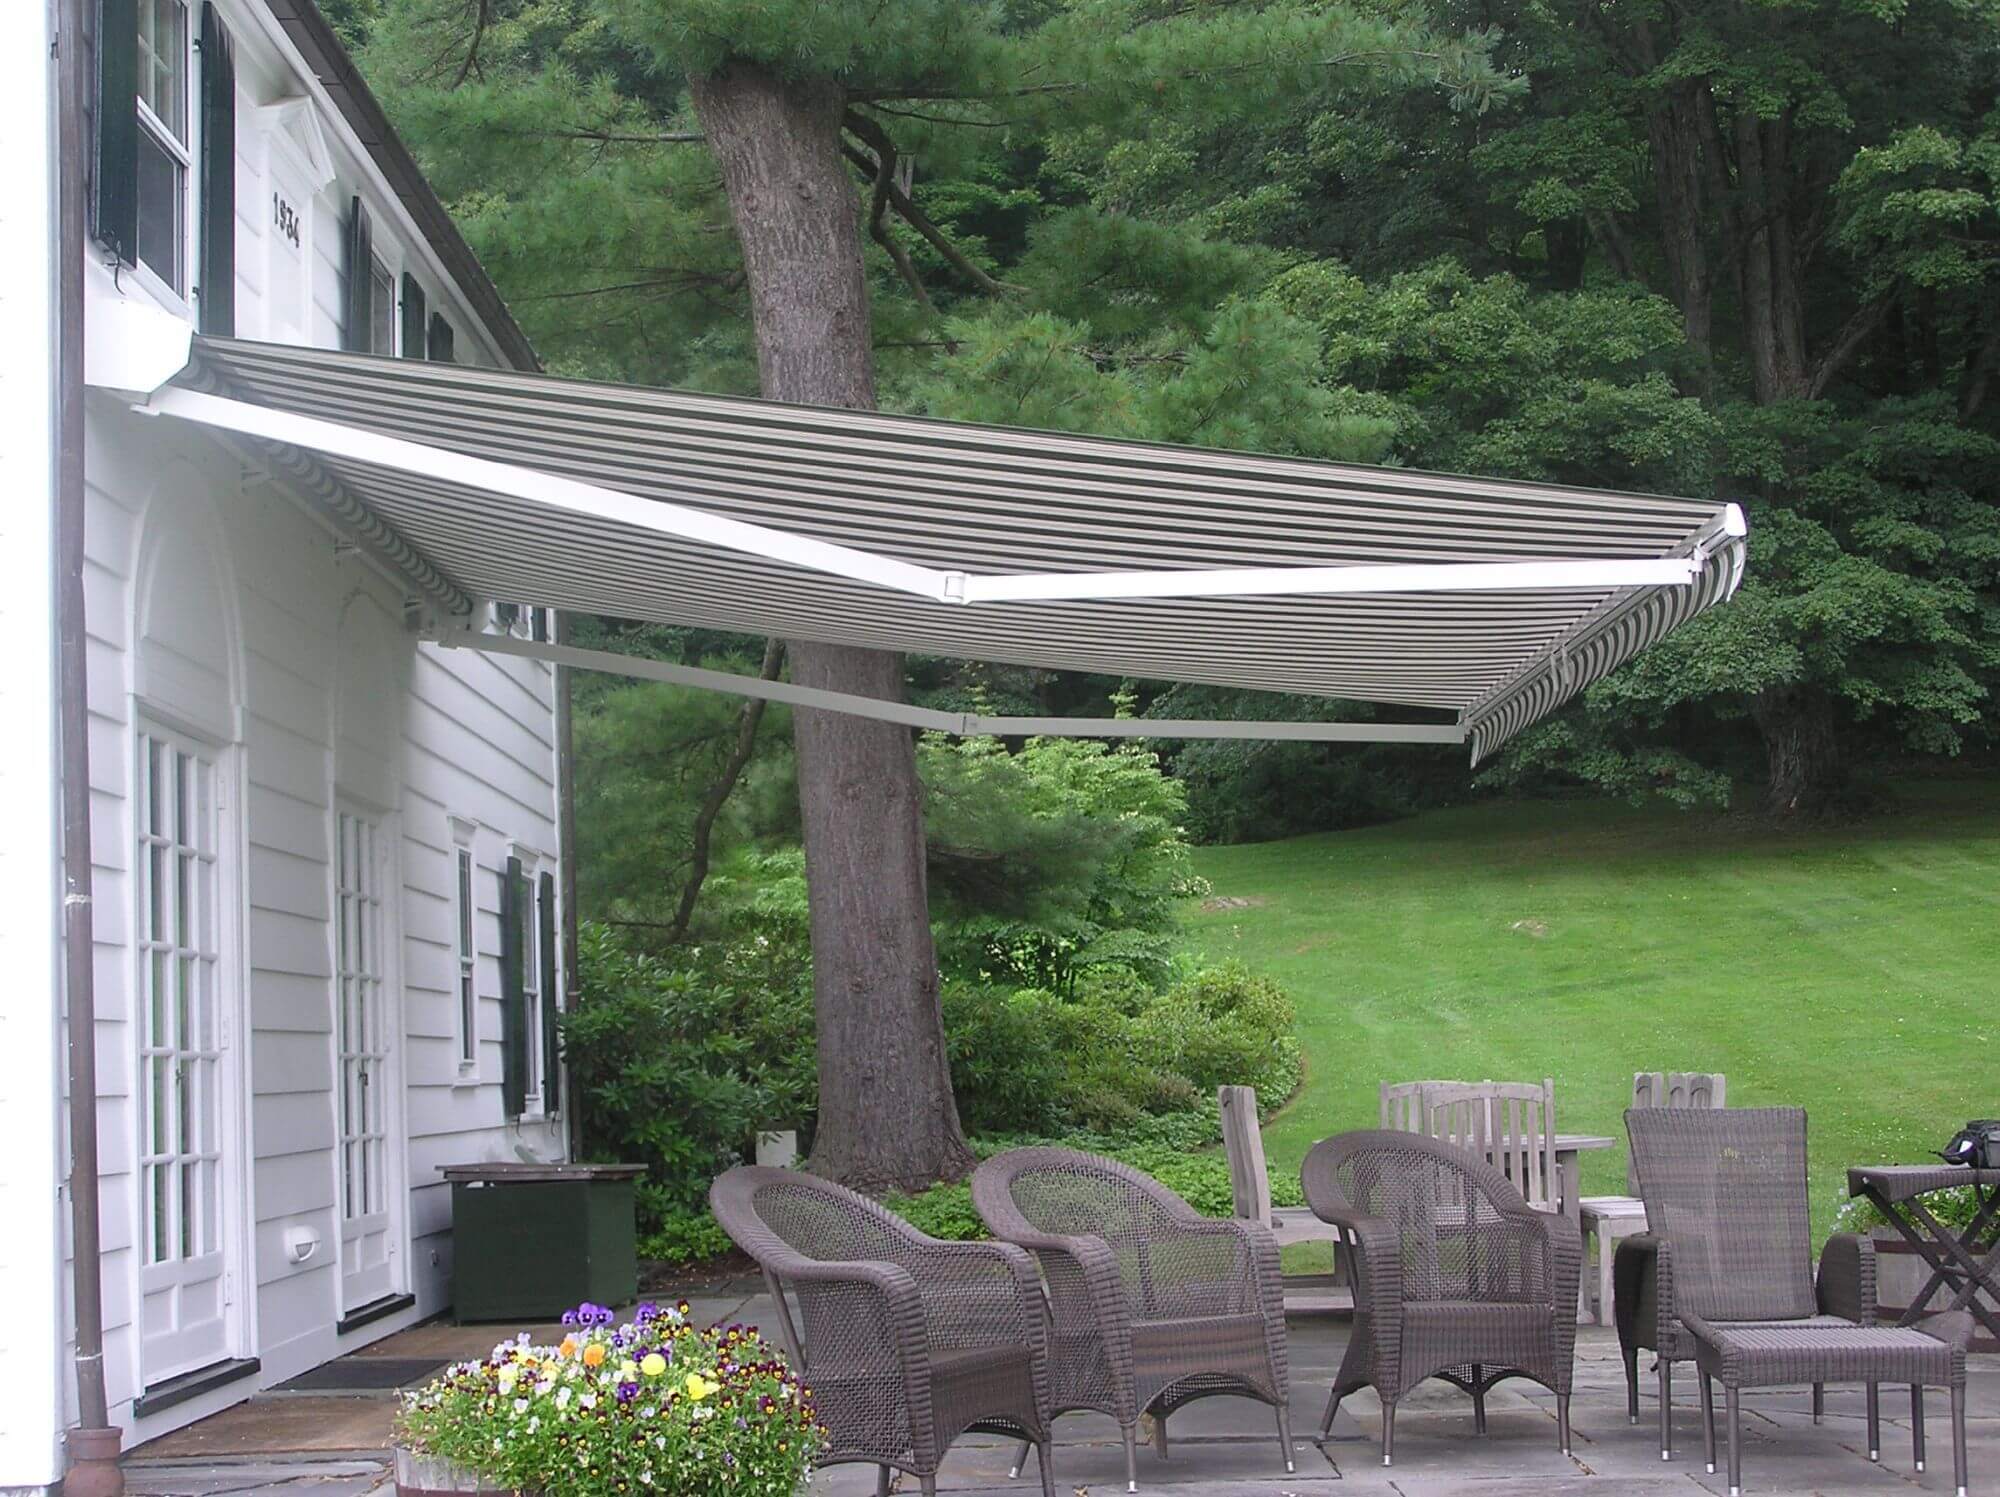 How To Install an Awning in Under a Minute